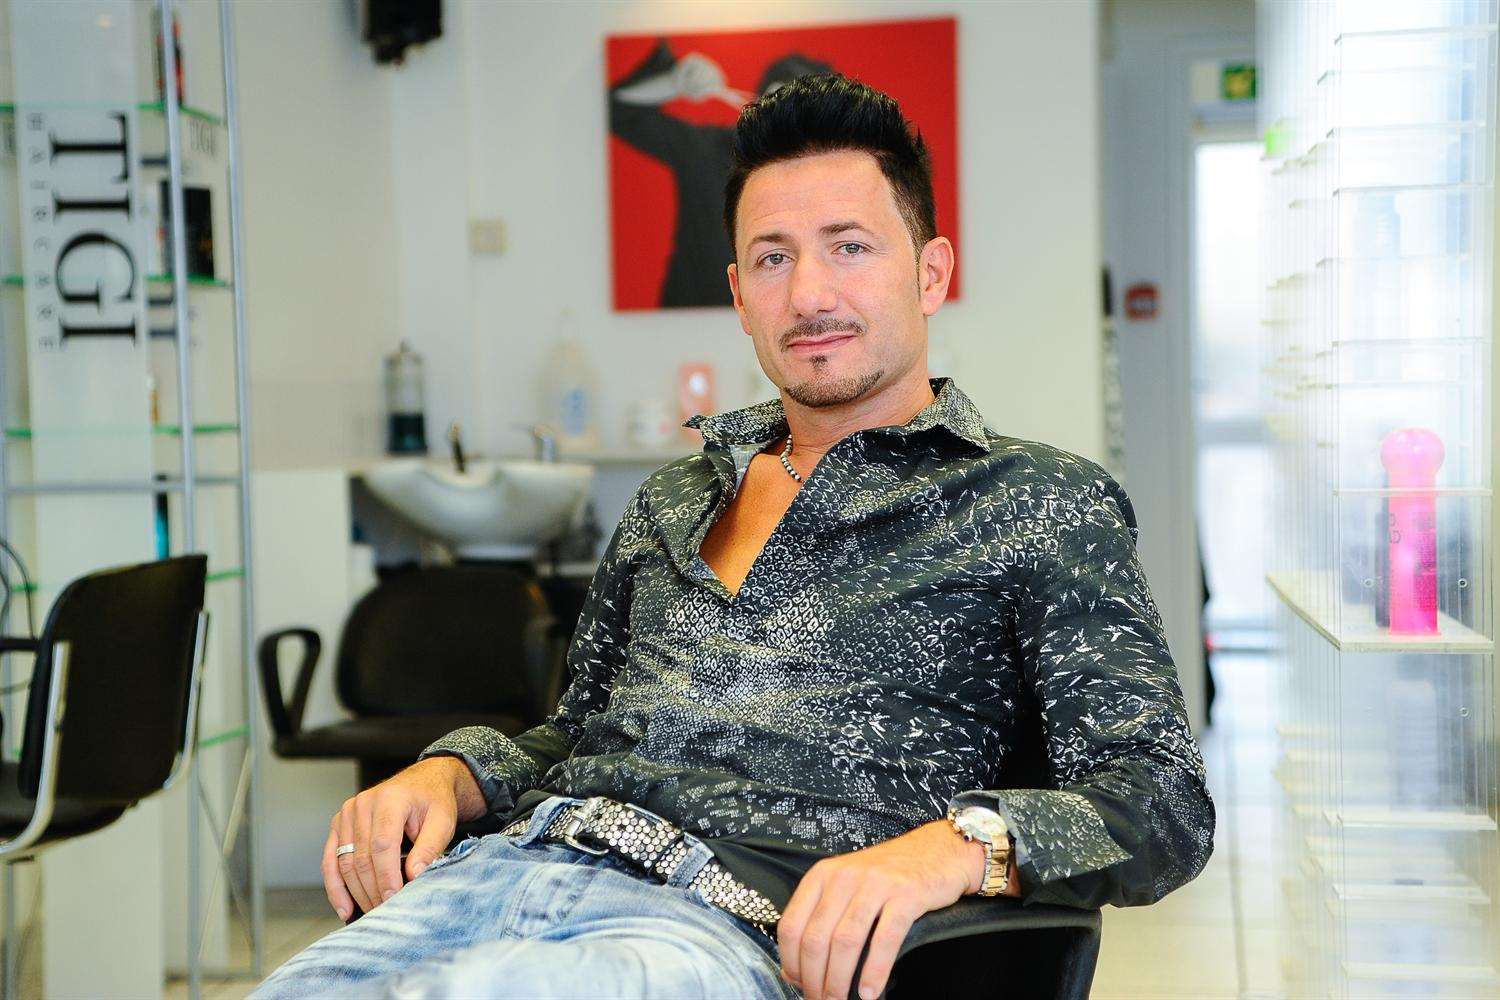 Hairdresser Marcello Marino who is preparing for two days of cut and blow drys at his Ramsgate salon in Westcliff Road in return for donations for the Pilgrims Hospice.